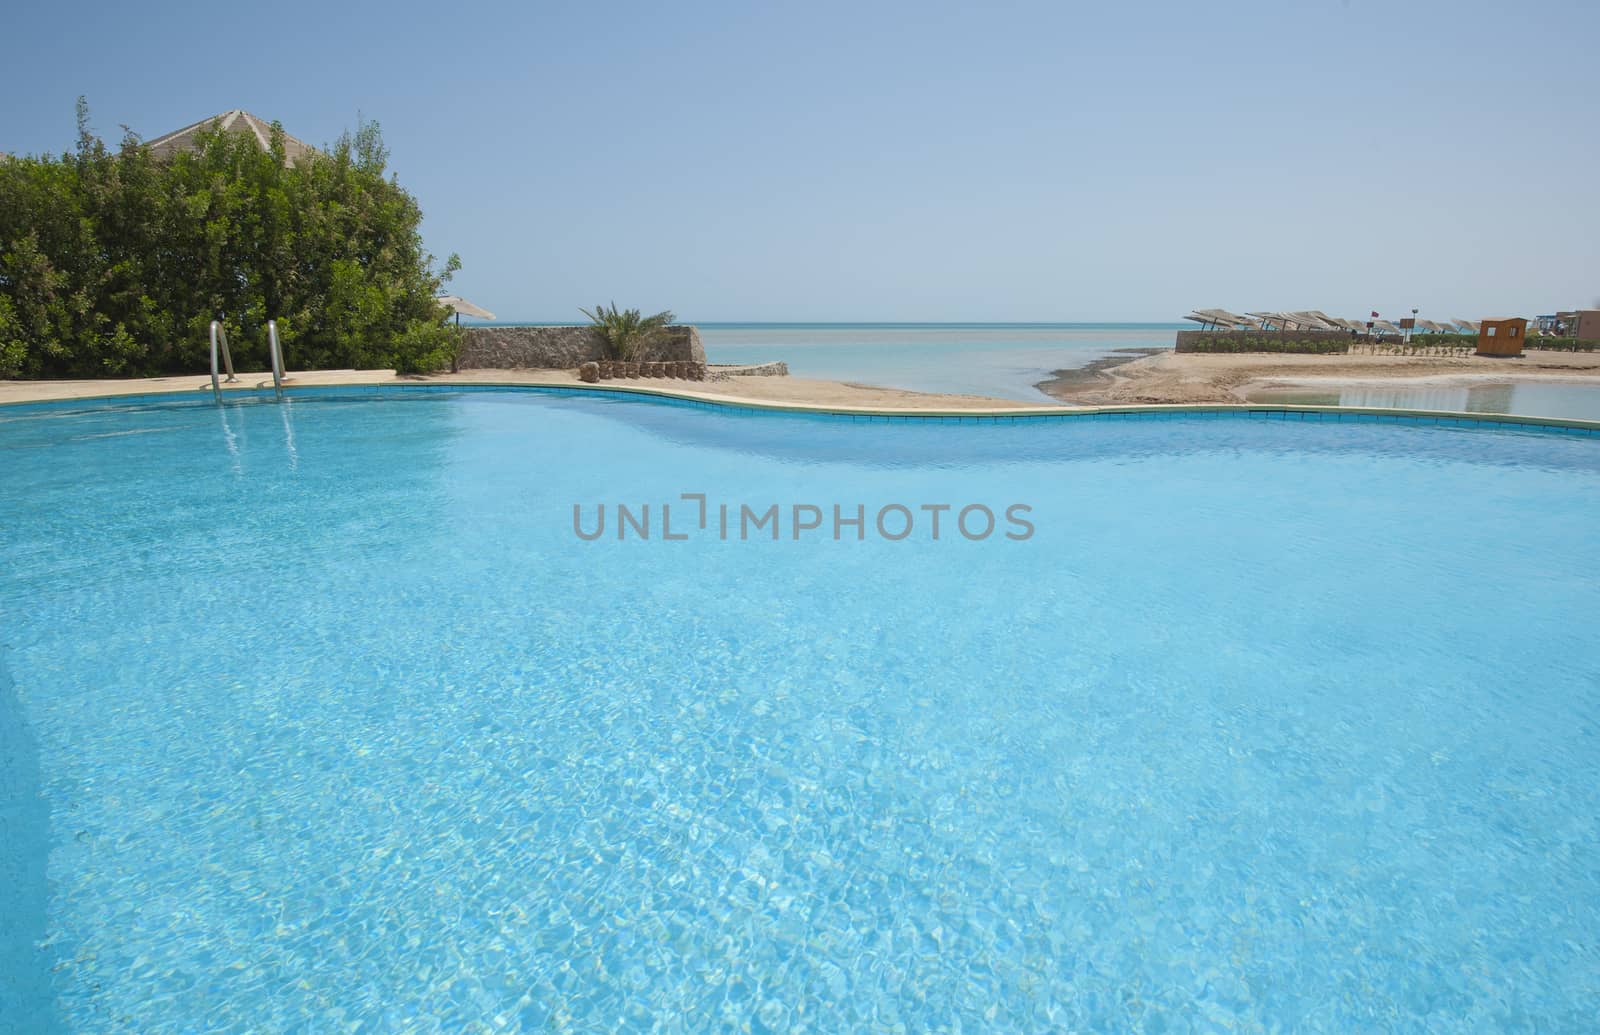 Luxury villa show home in tropical summer holiday resort with swimming pool and sea view